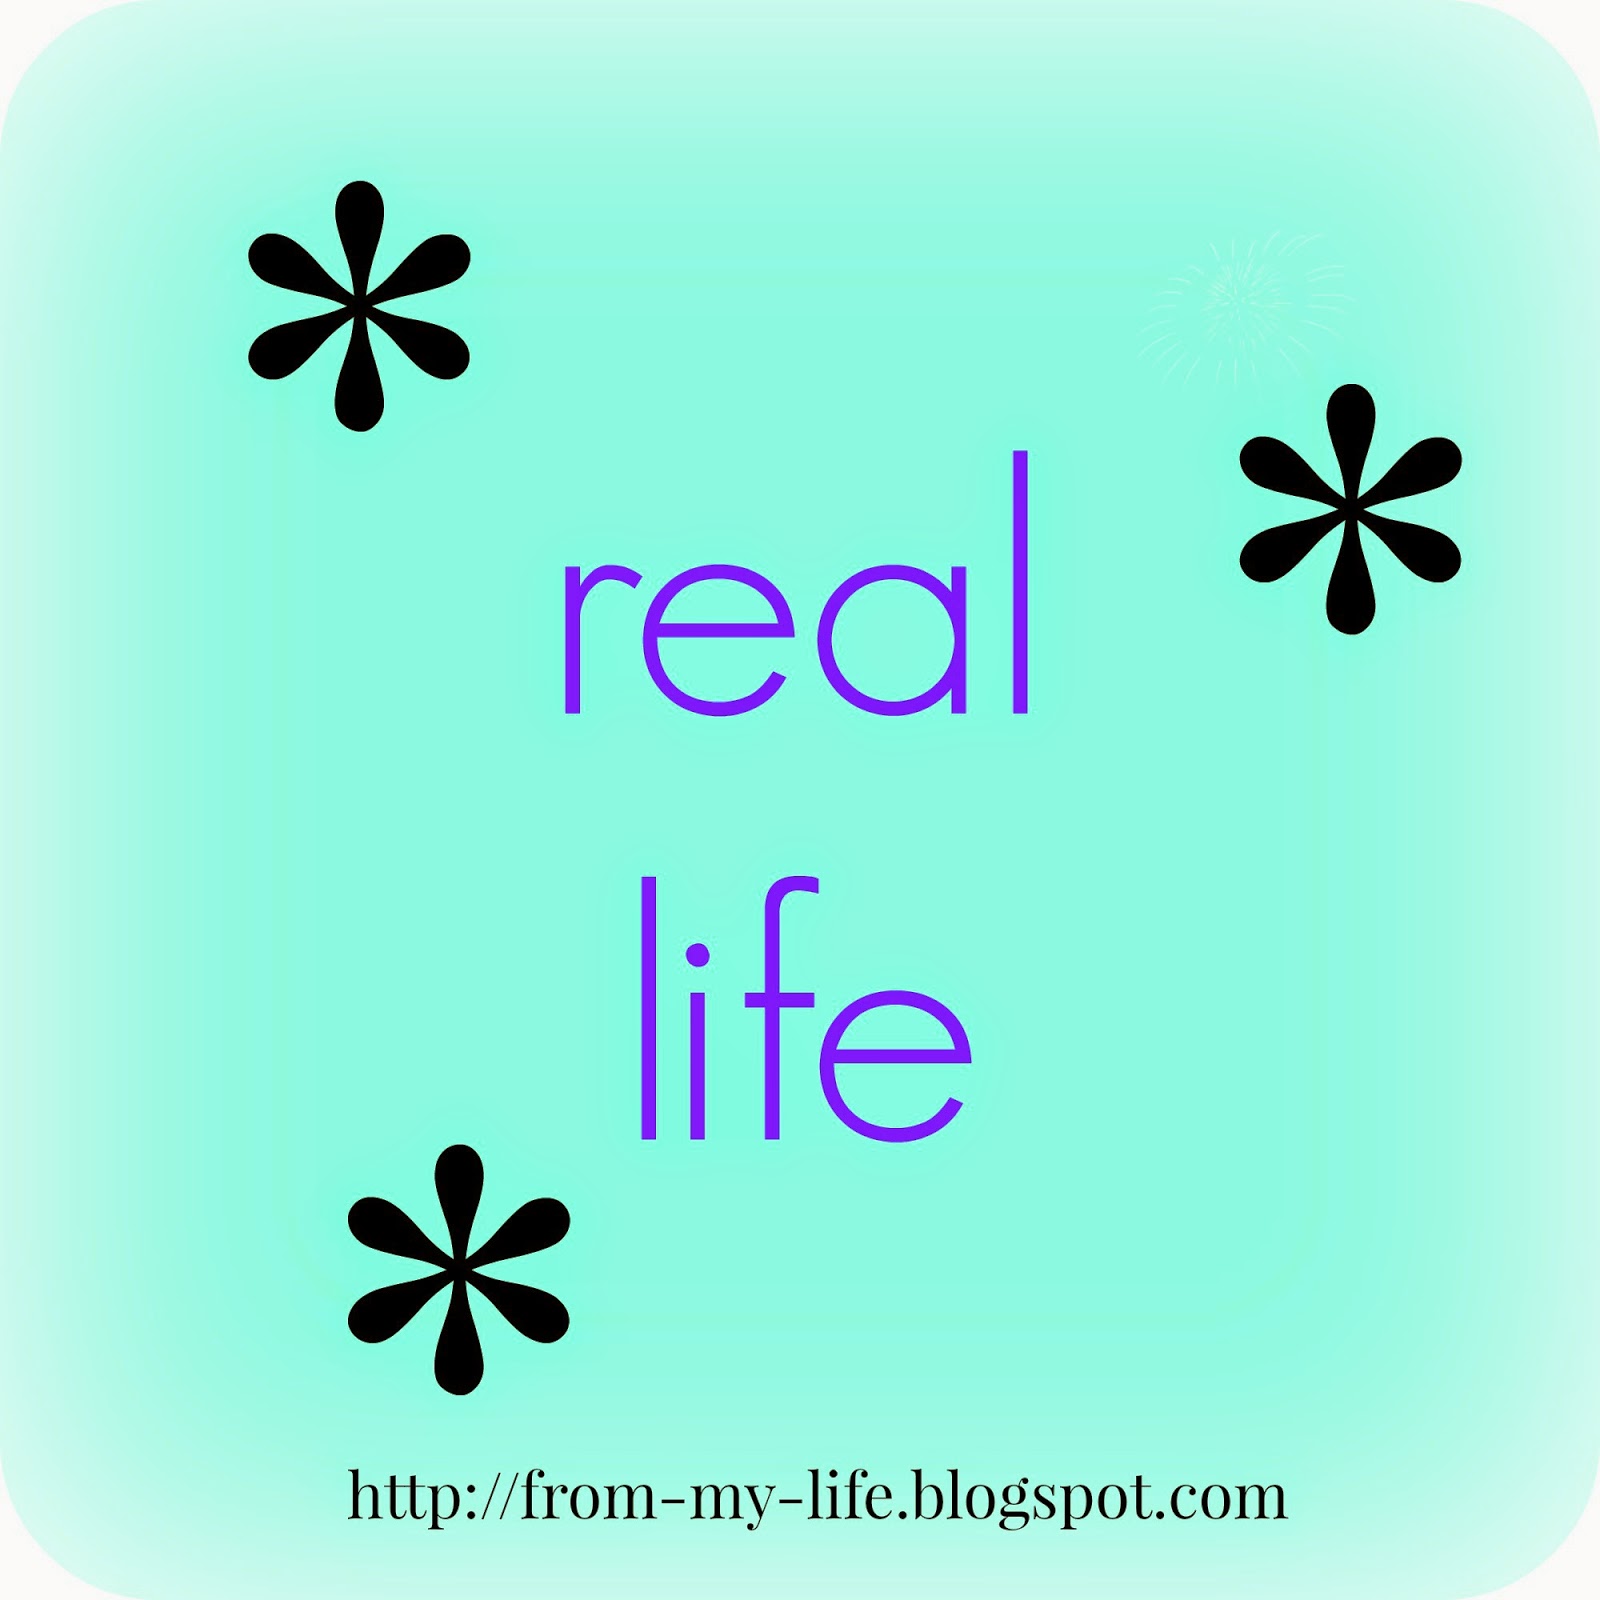 http://from-my-life.blogspot.com/search/label/real%20life